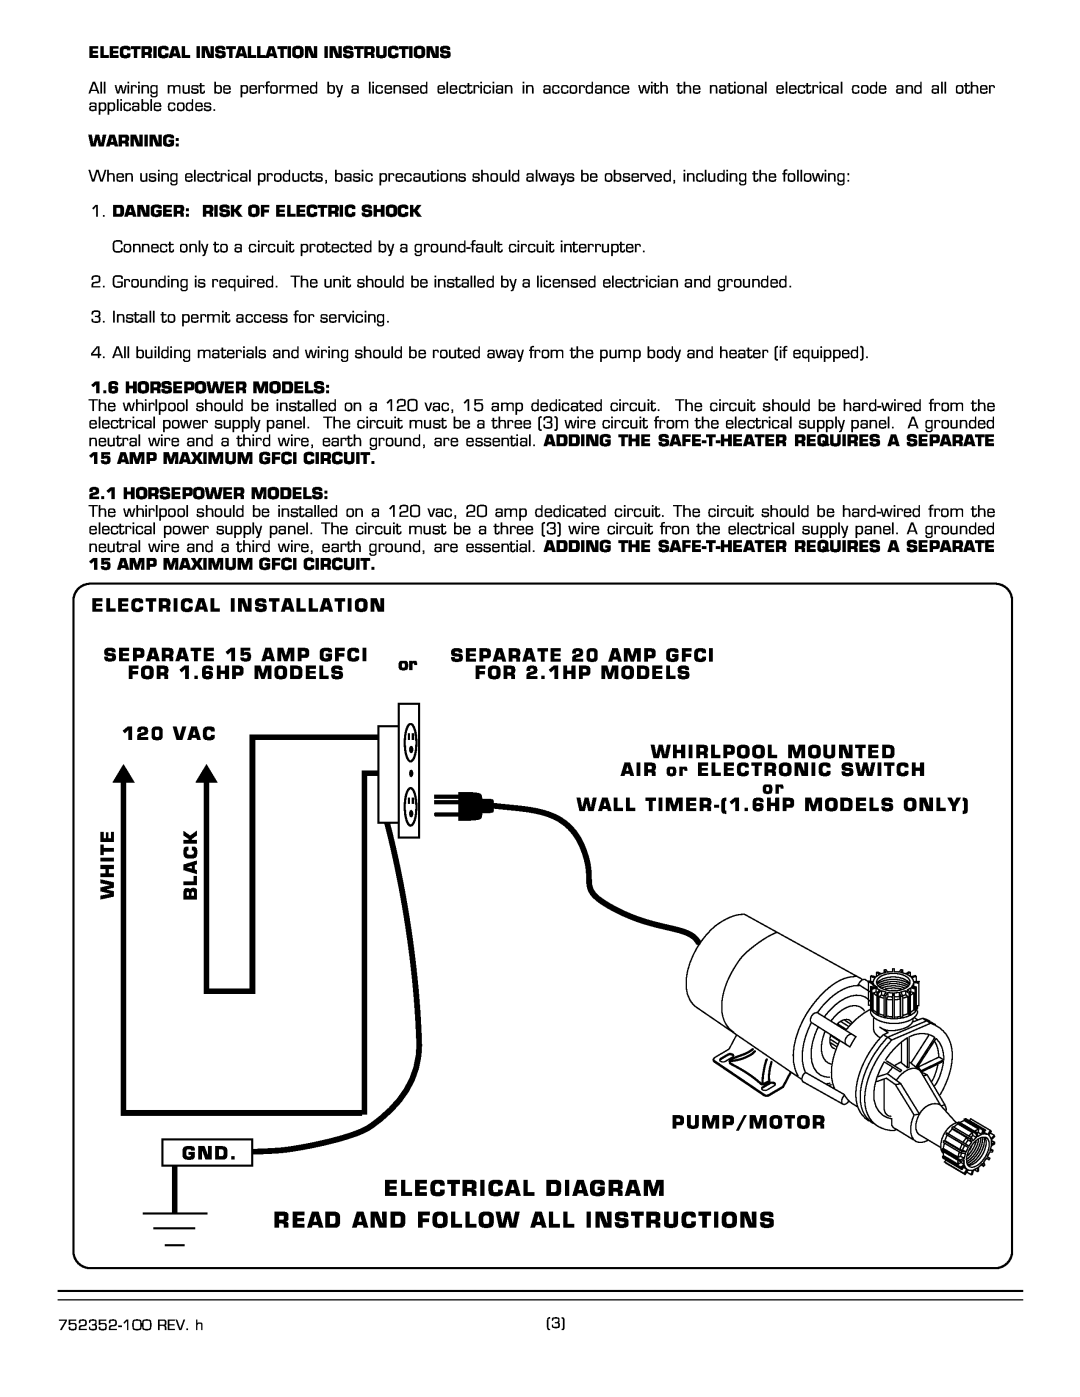 American Standard 2703.XXXW Series installation instructions Electrical Diagram, Read And Follow All Instructions 